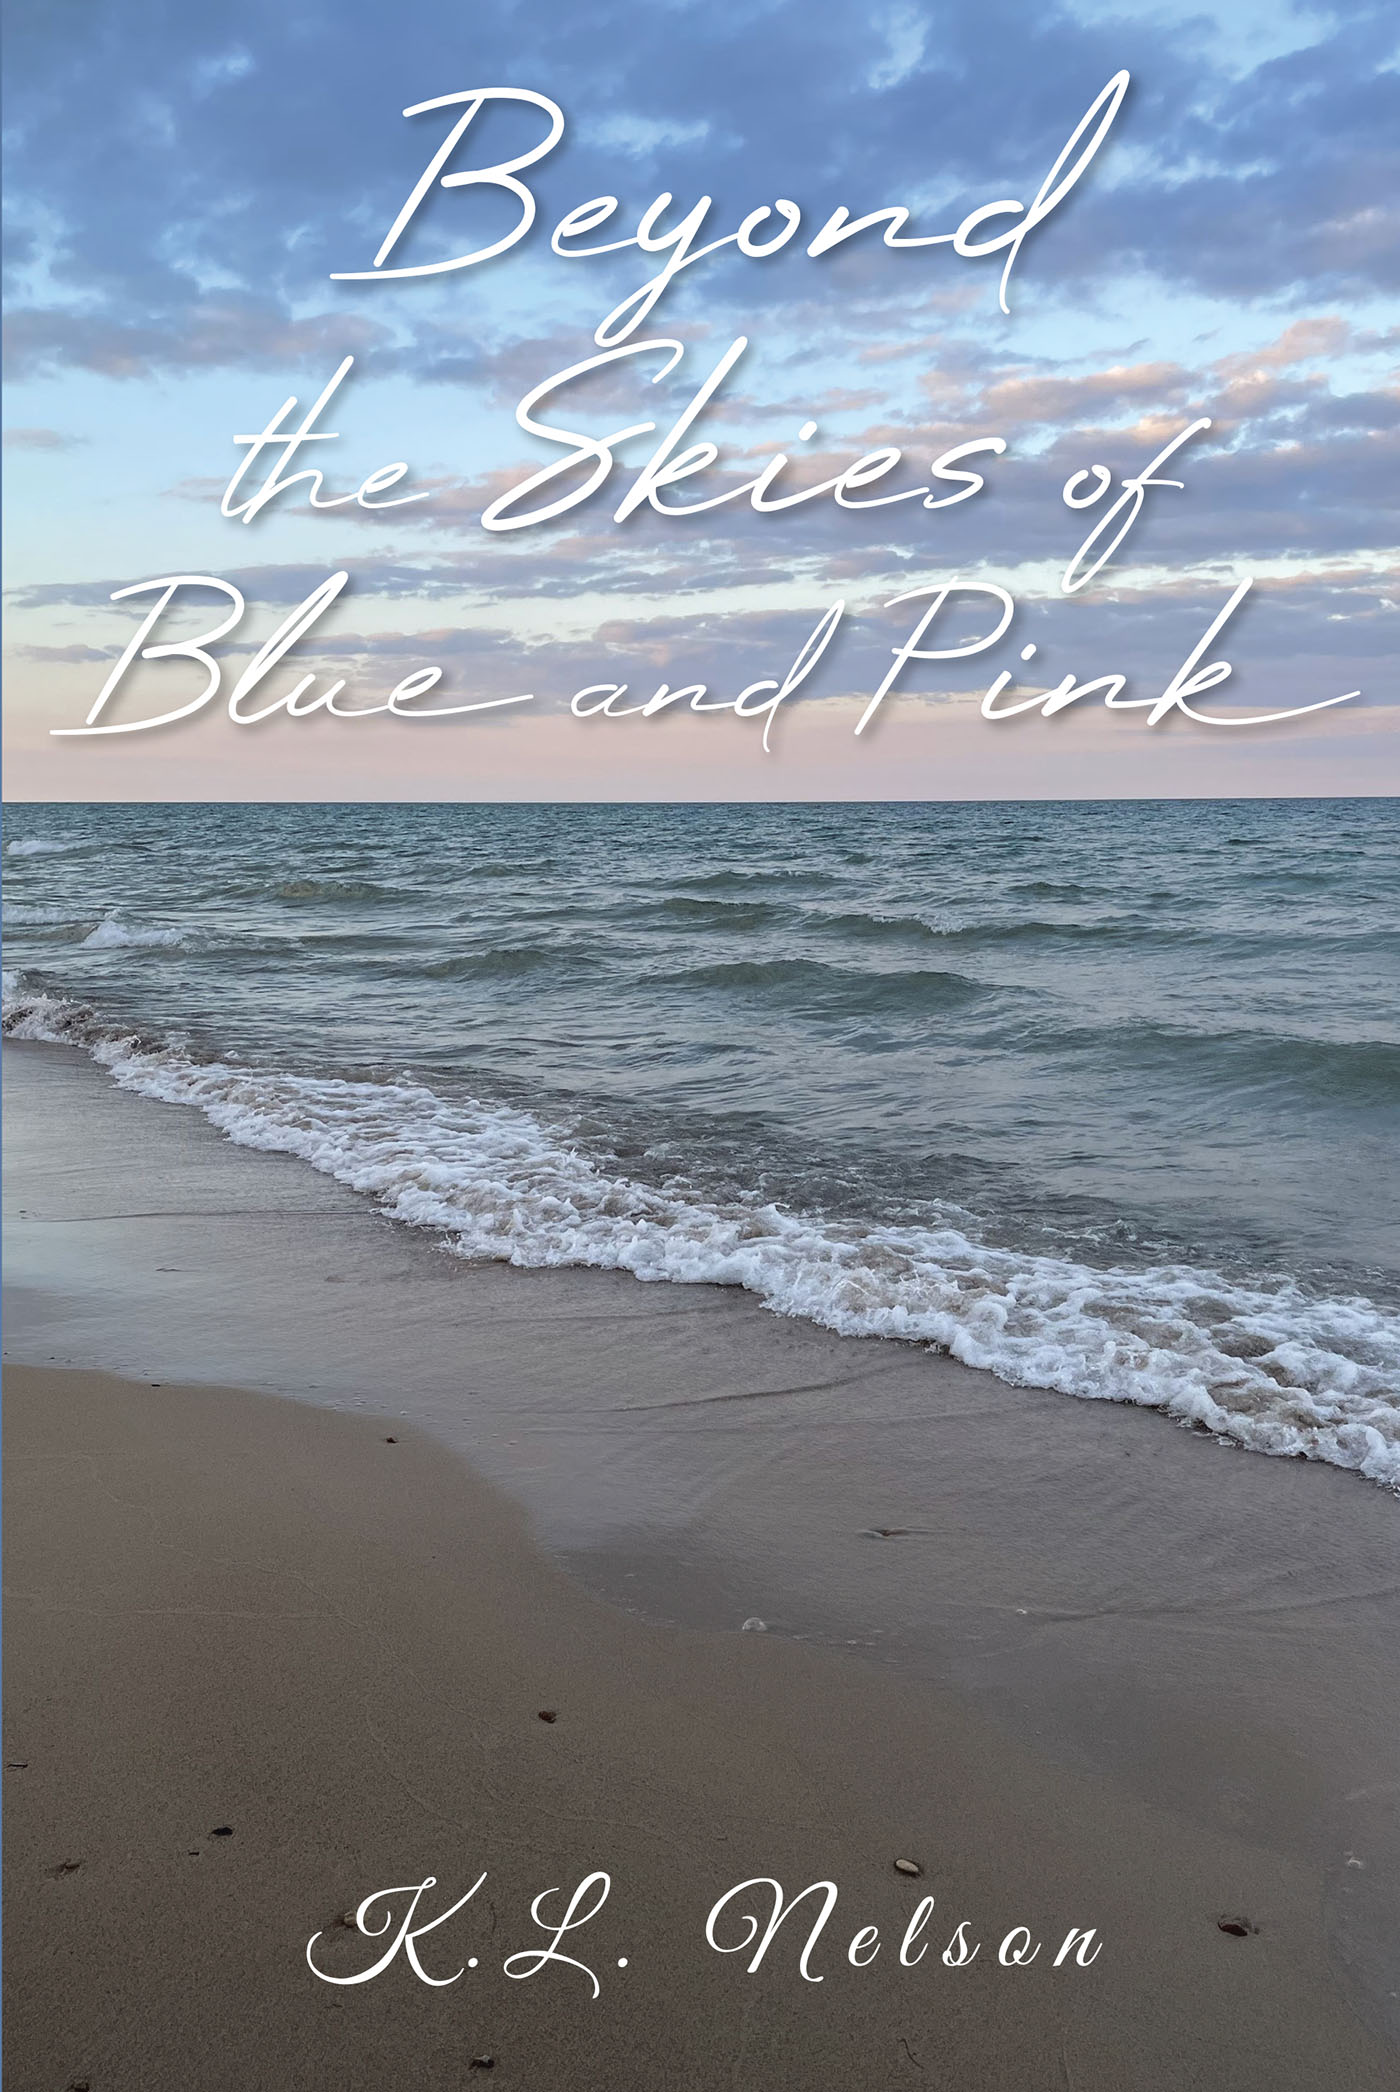 K.l. Nelson’s Newly Released "Beyond the Skies of Blue and Pink" is a Powerful Inspirational That Explores the Complexities of Grief